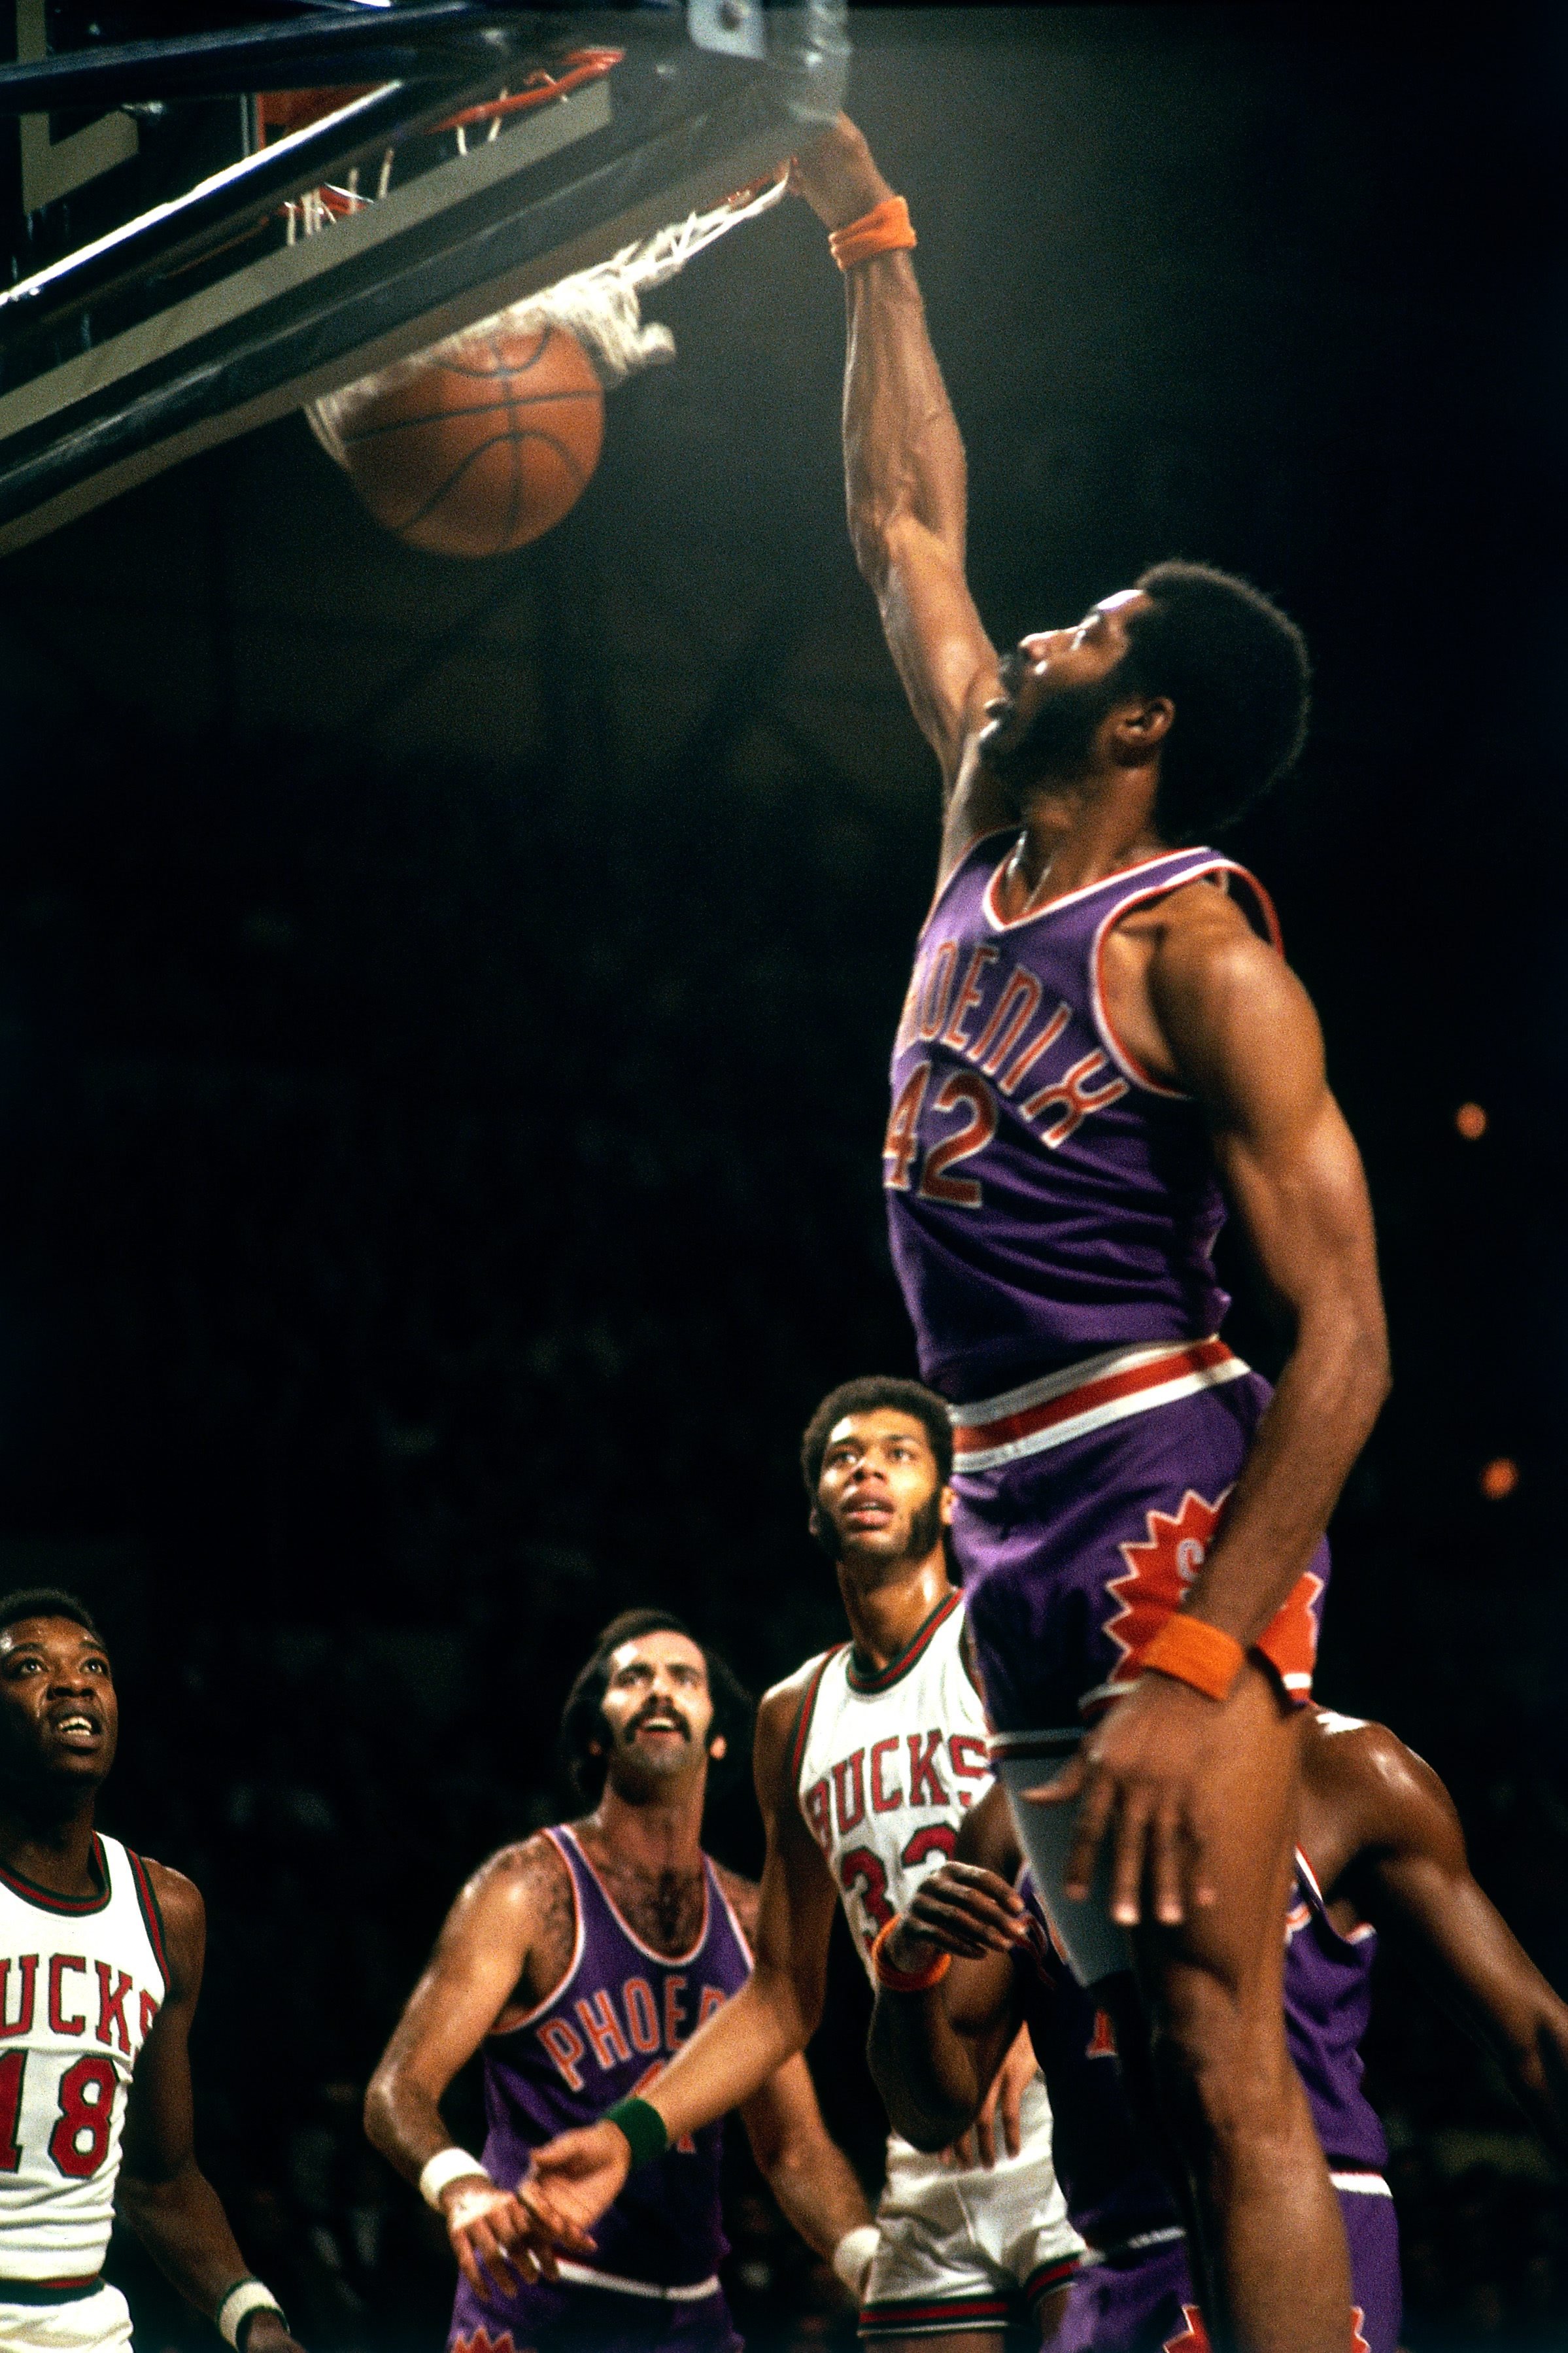 Connie Hawkins' Revolution in Arizona, 1971 – From Way Downtown